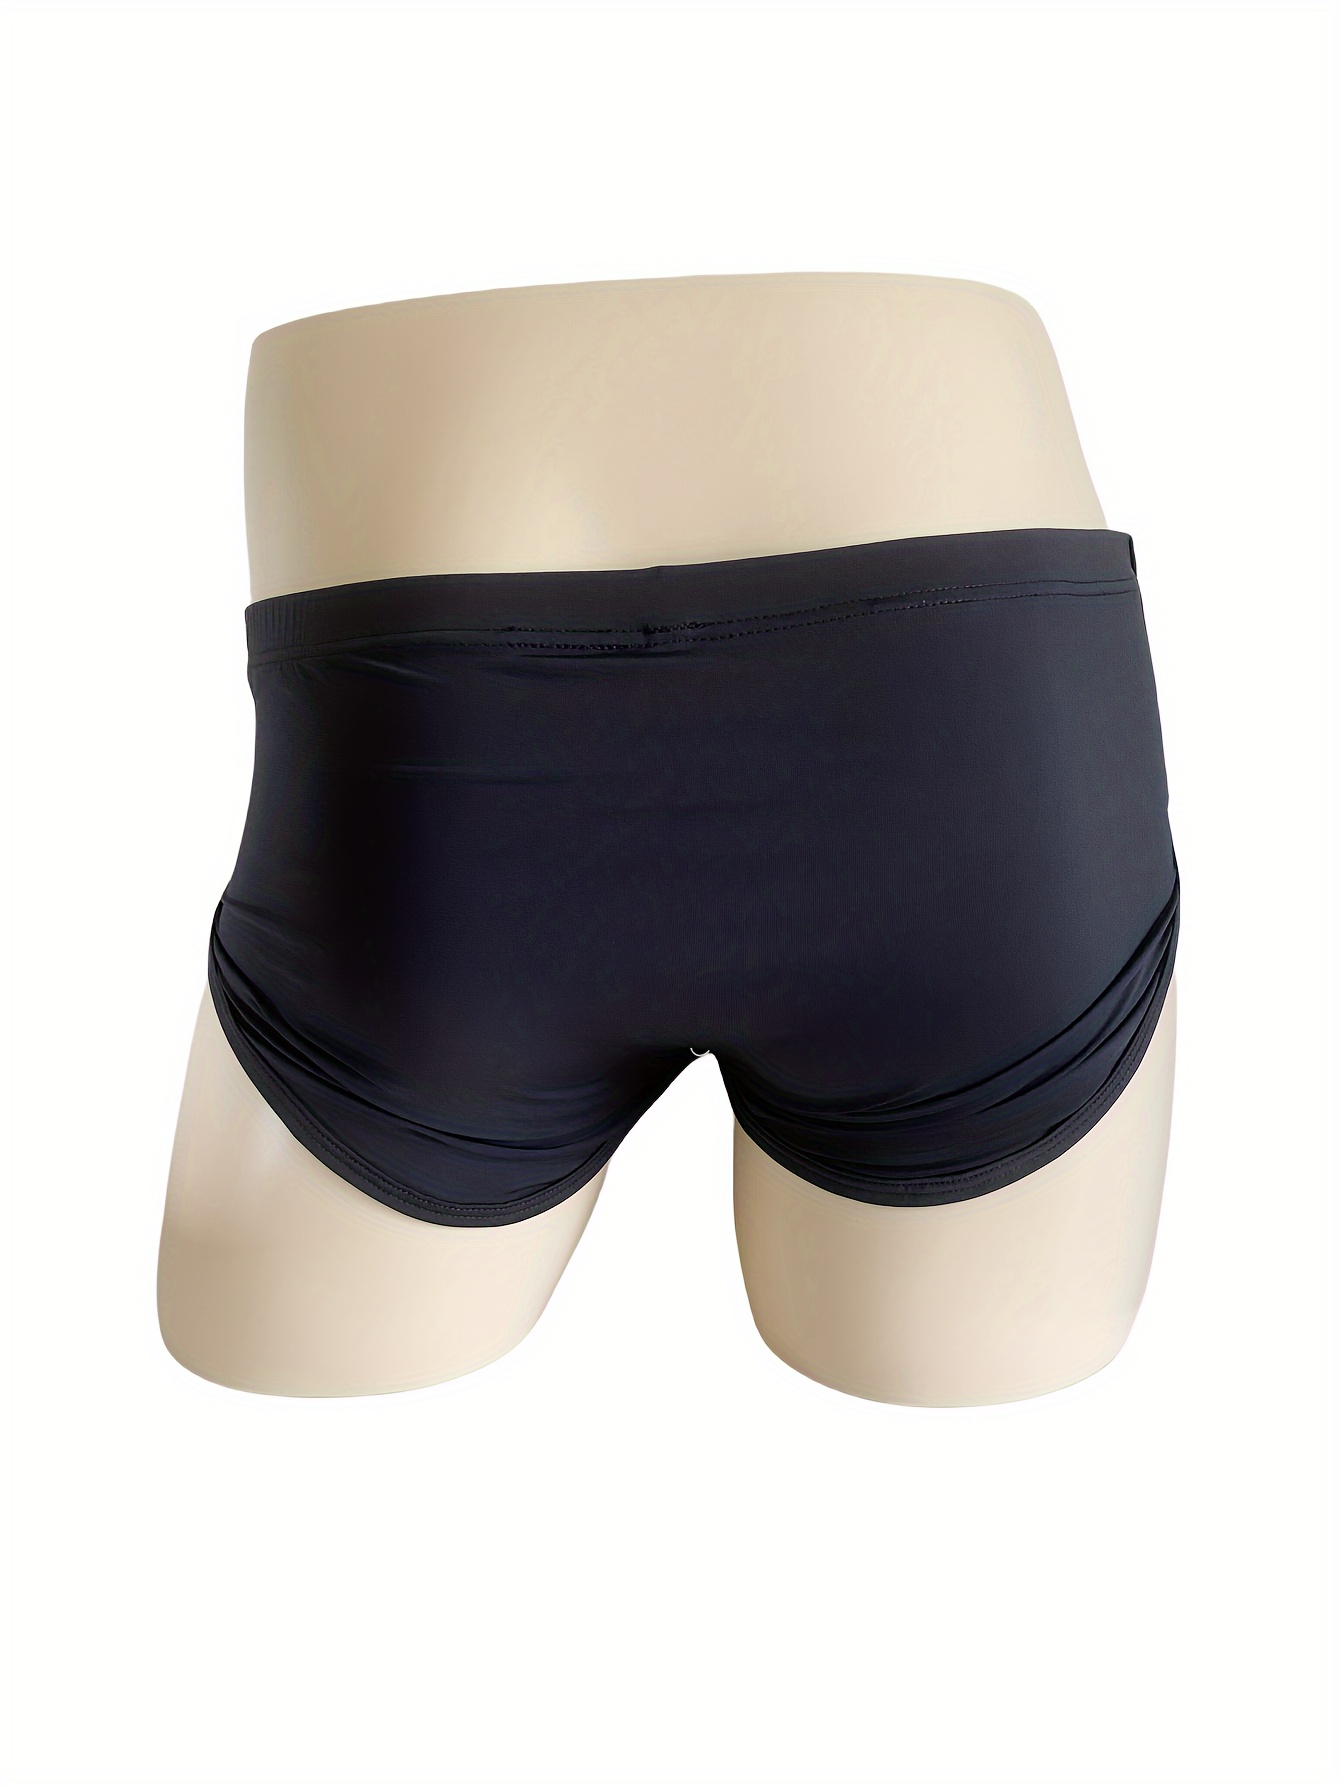 Mens Spanks Underwear Mens Sports Comfortable Breathable Cotton Hollow Sexy